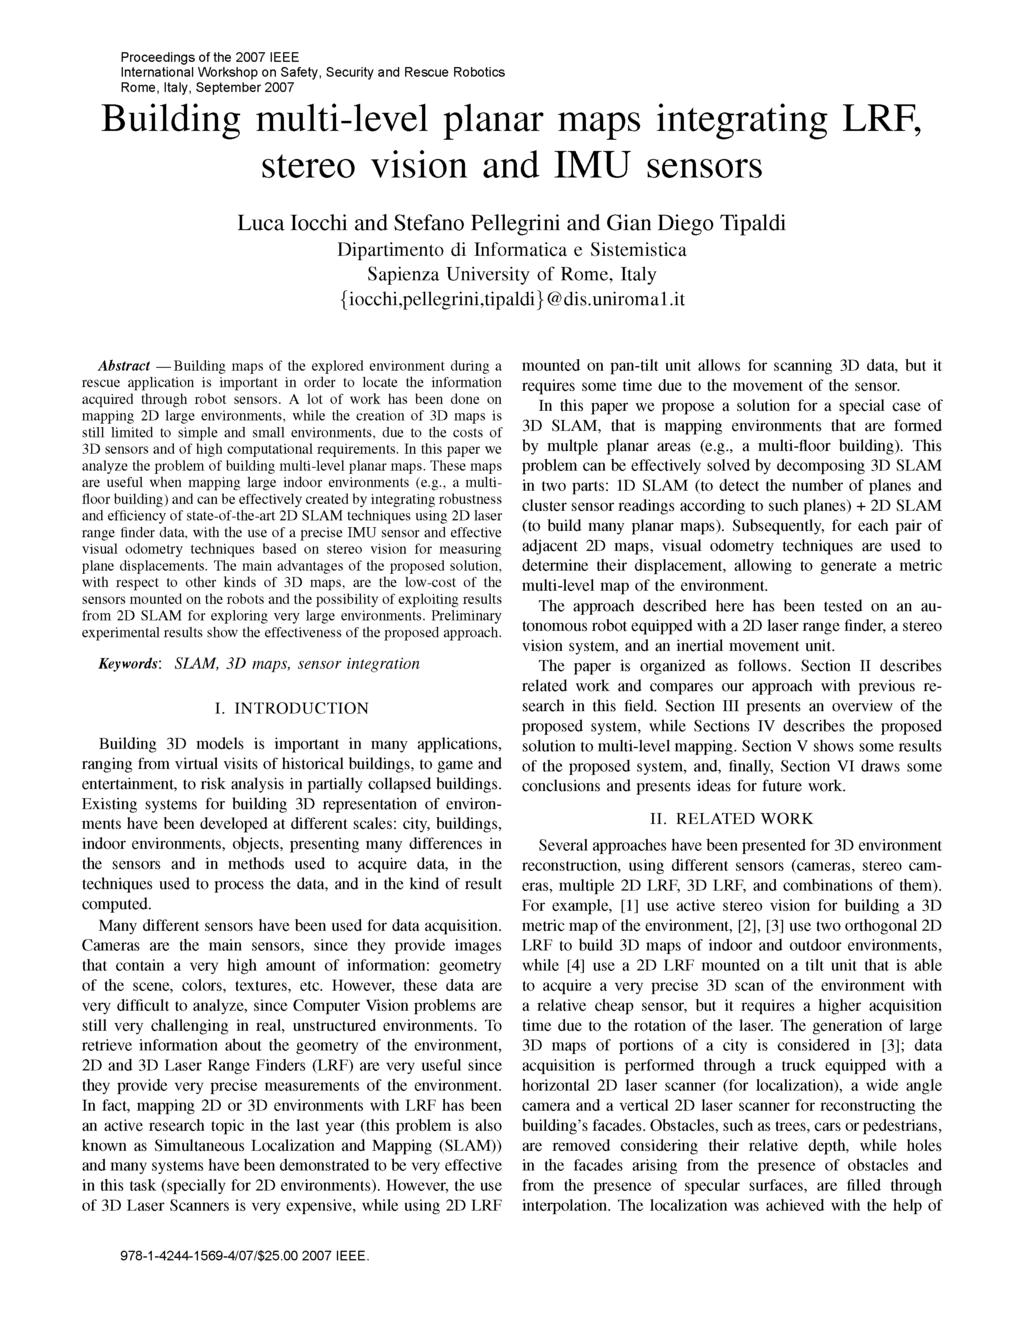 Proceedings of the 2007 IEEE International Workshop on Safety, Security and Rescue Robotics Rome, Italy, September 2007 Building multi-level planar maps integrating LRF, stereo vision and IMU sensors